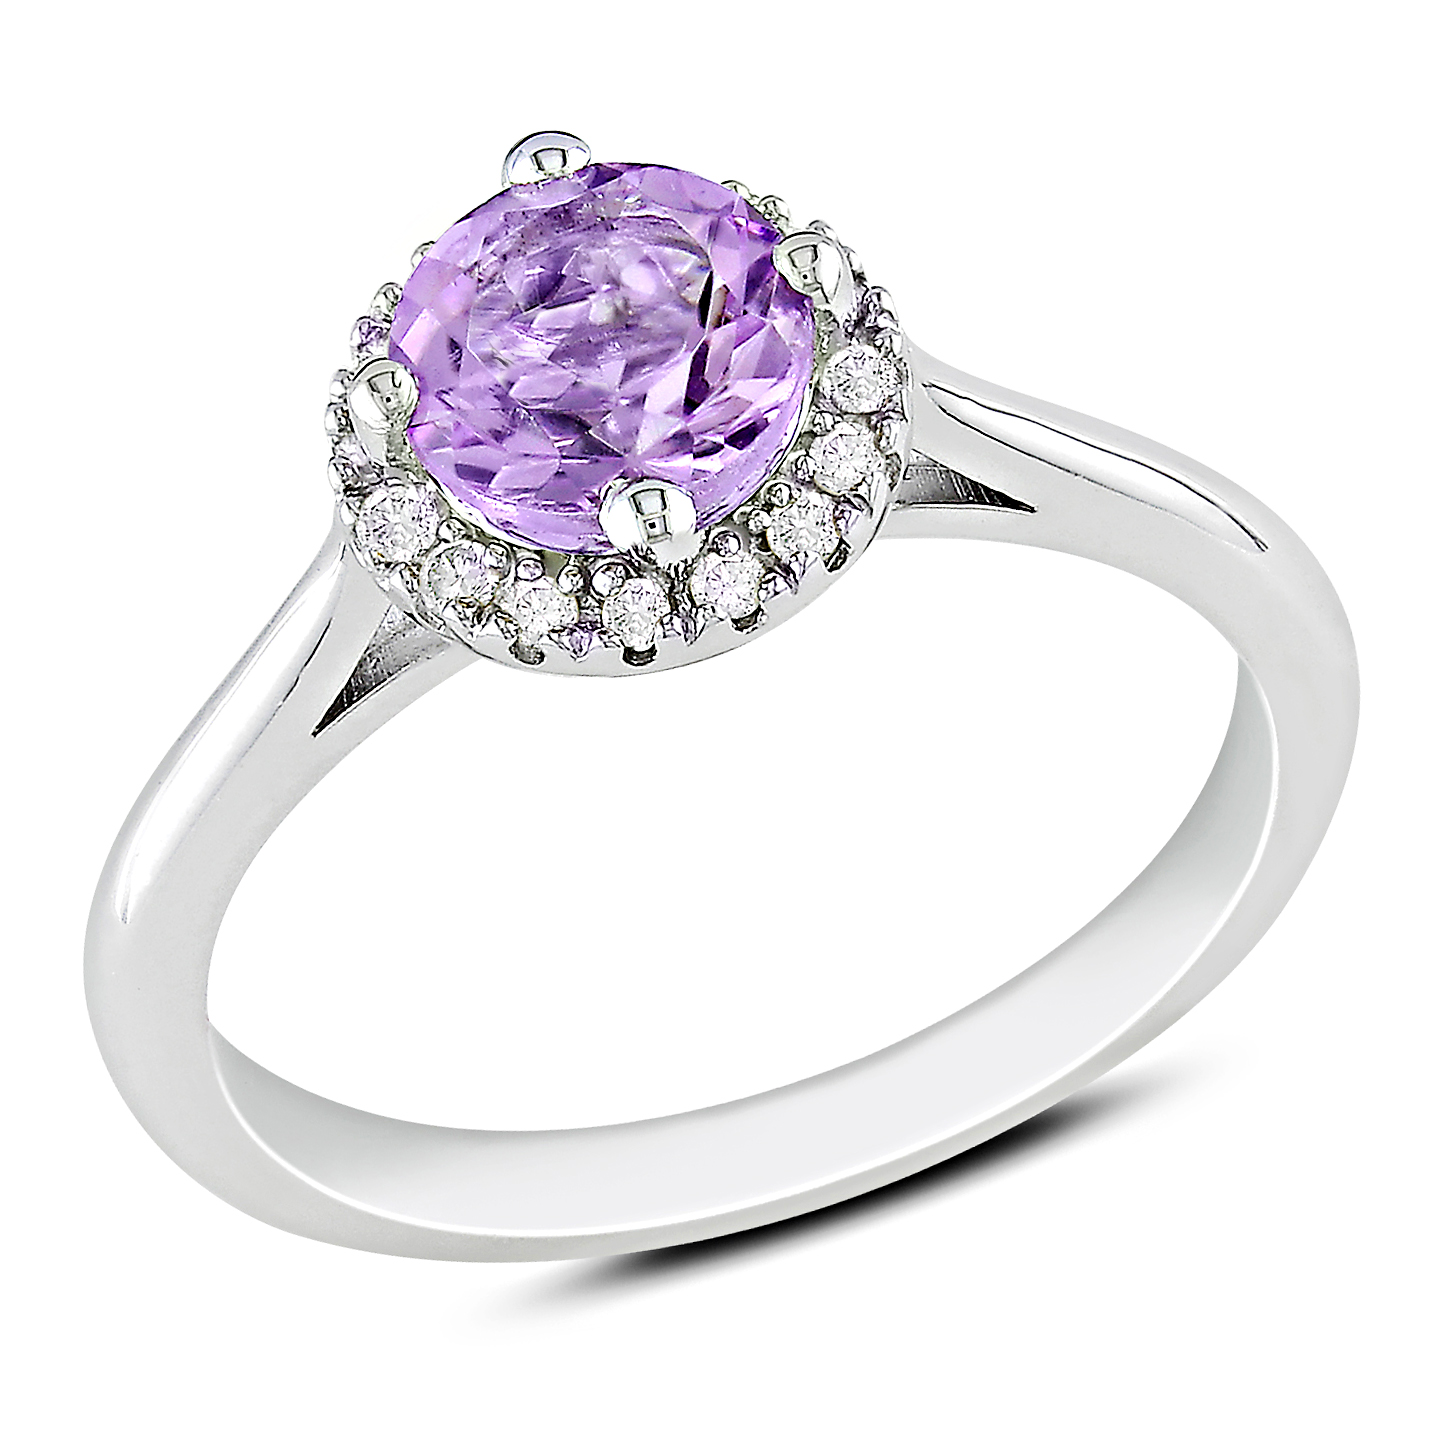 Amour 1/10 Carat T.W. Diamond and 5/8 Carat T.G.W. Amethyst Fashion Ring in Sterling Silver GH I3